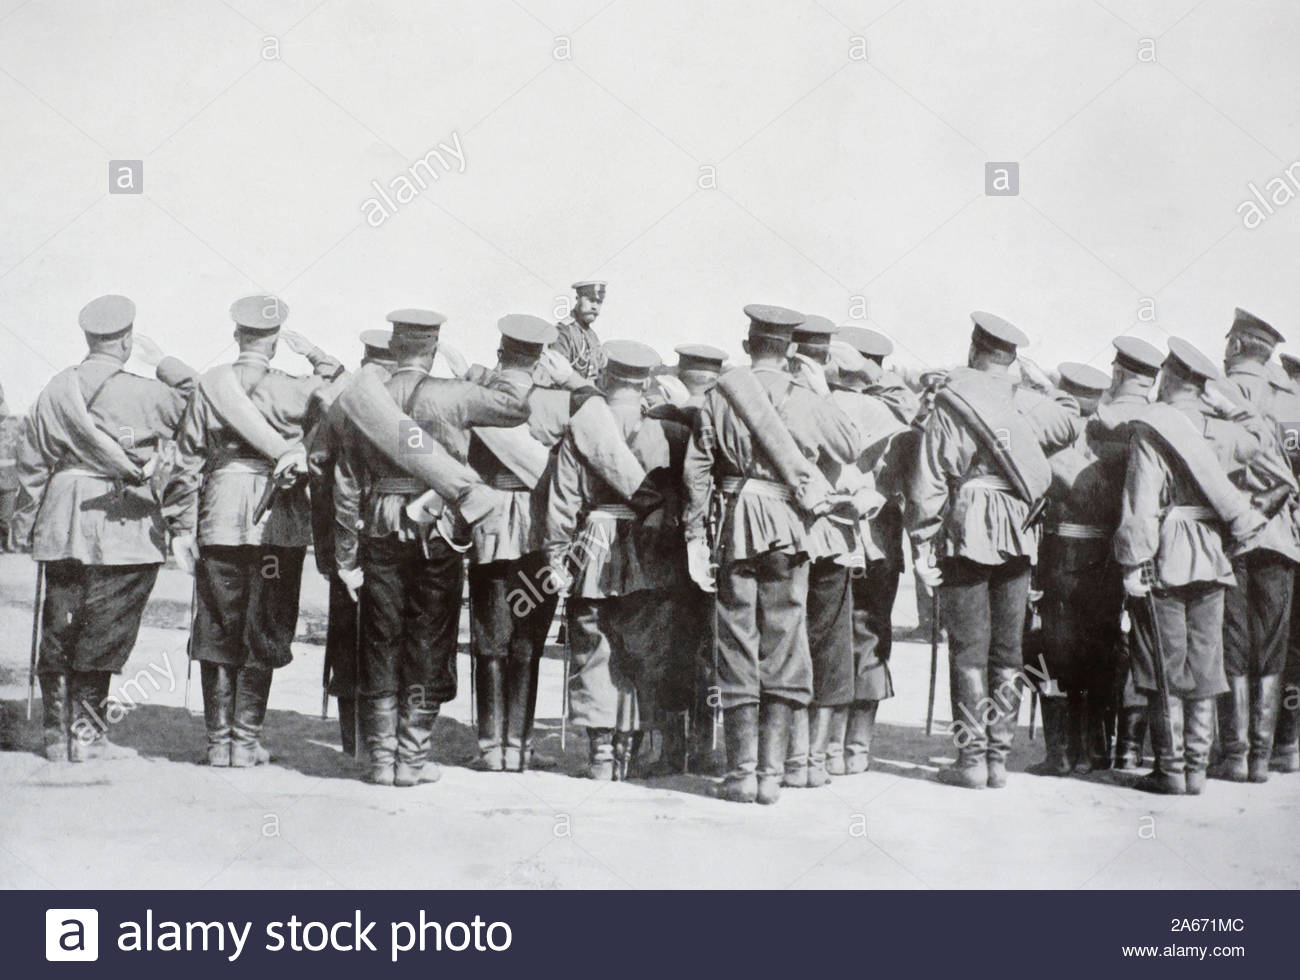 WW1 Russian Infantry soldiers saluting Tsar Nicholas II, Emperor of Russia, vintage photograph from 1914 Stock Photo